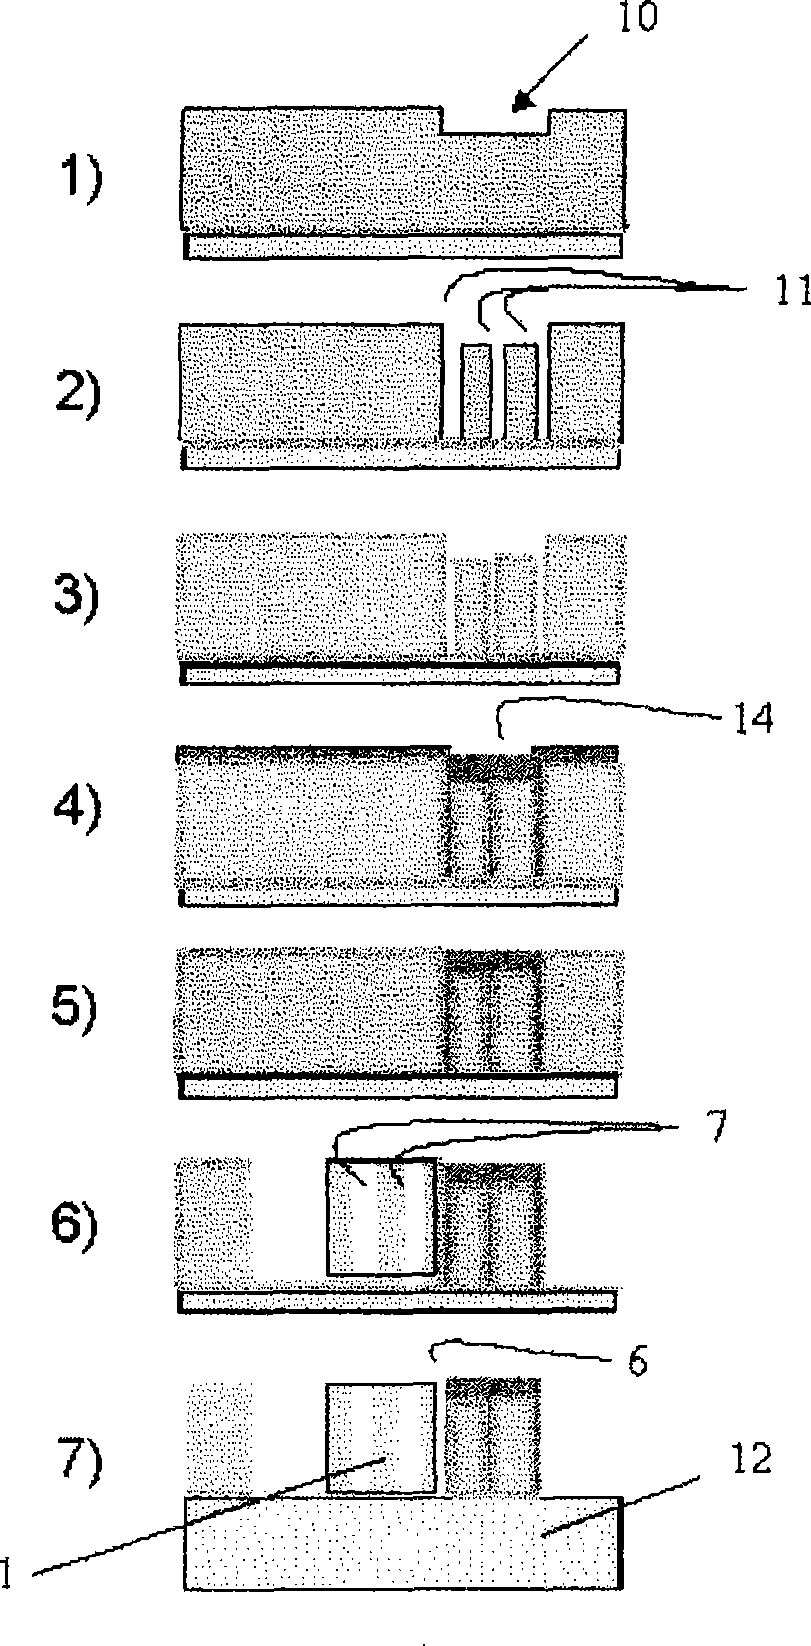 Method for manufacturing micromechanical components